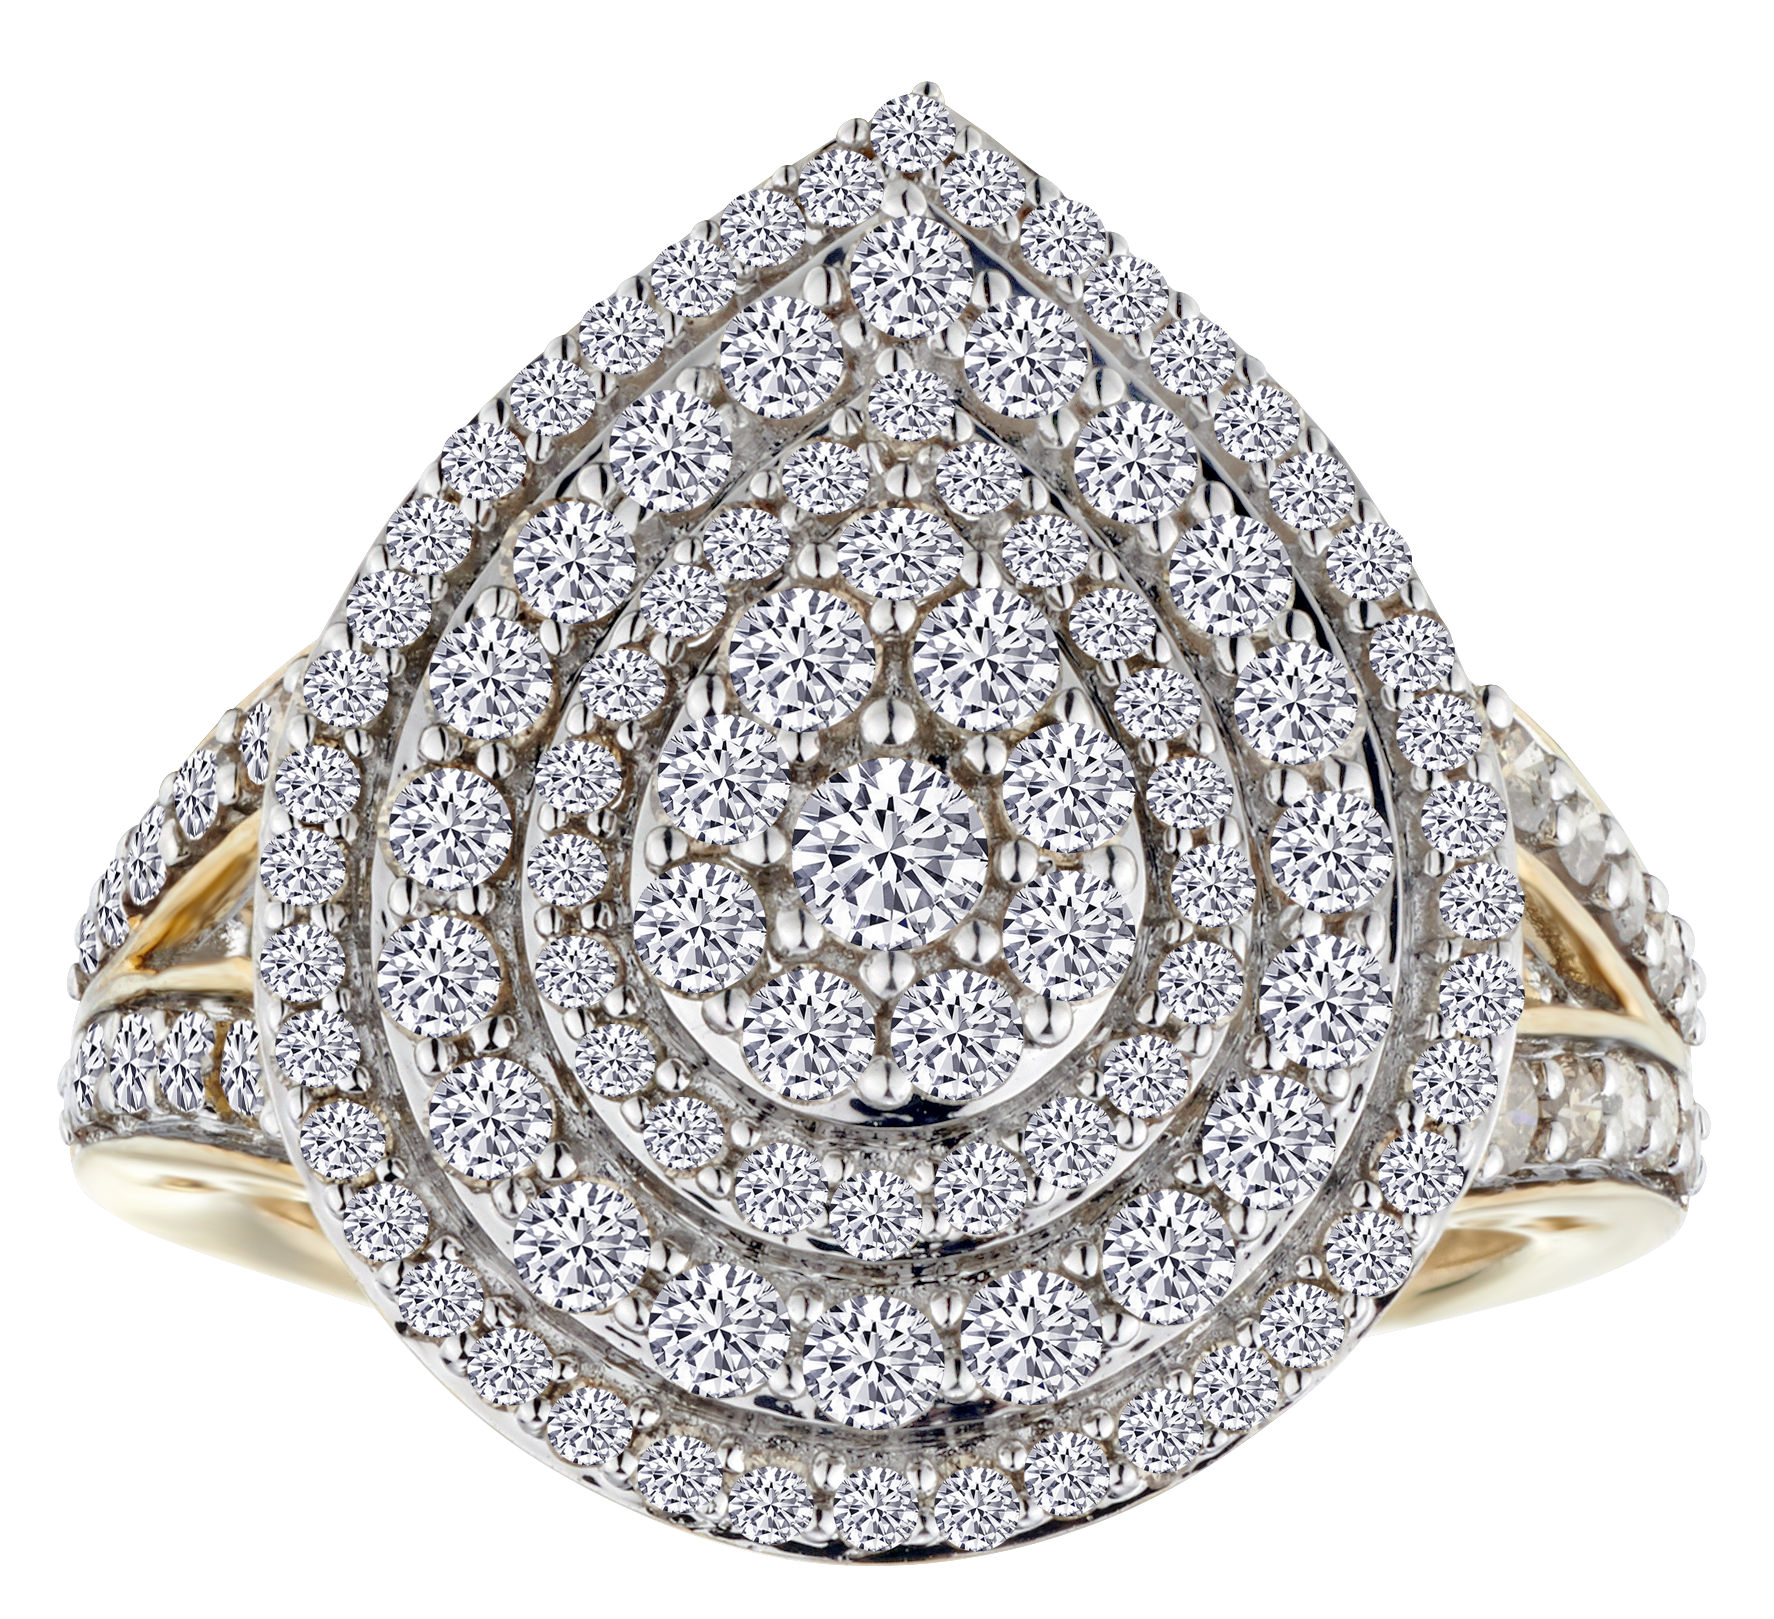 2.00 Carat of Diamonds "Sparkle" Ring, 10kt Yellow Gold.....................NOW